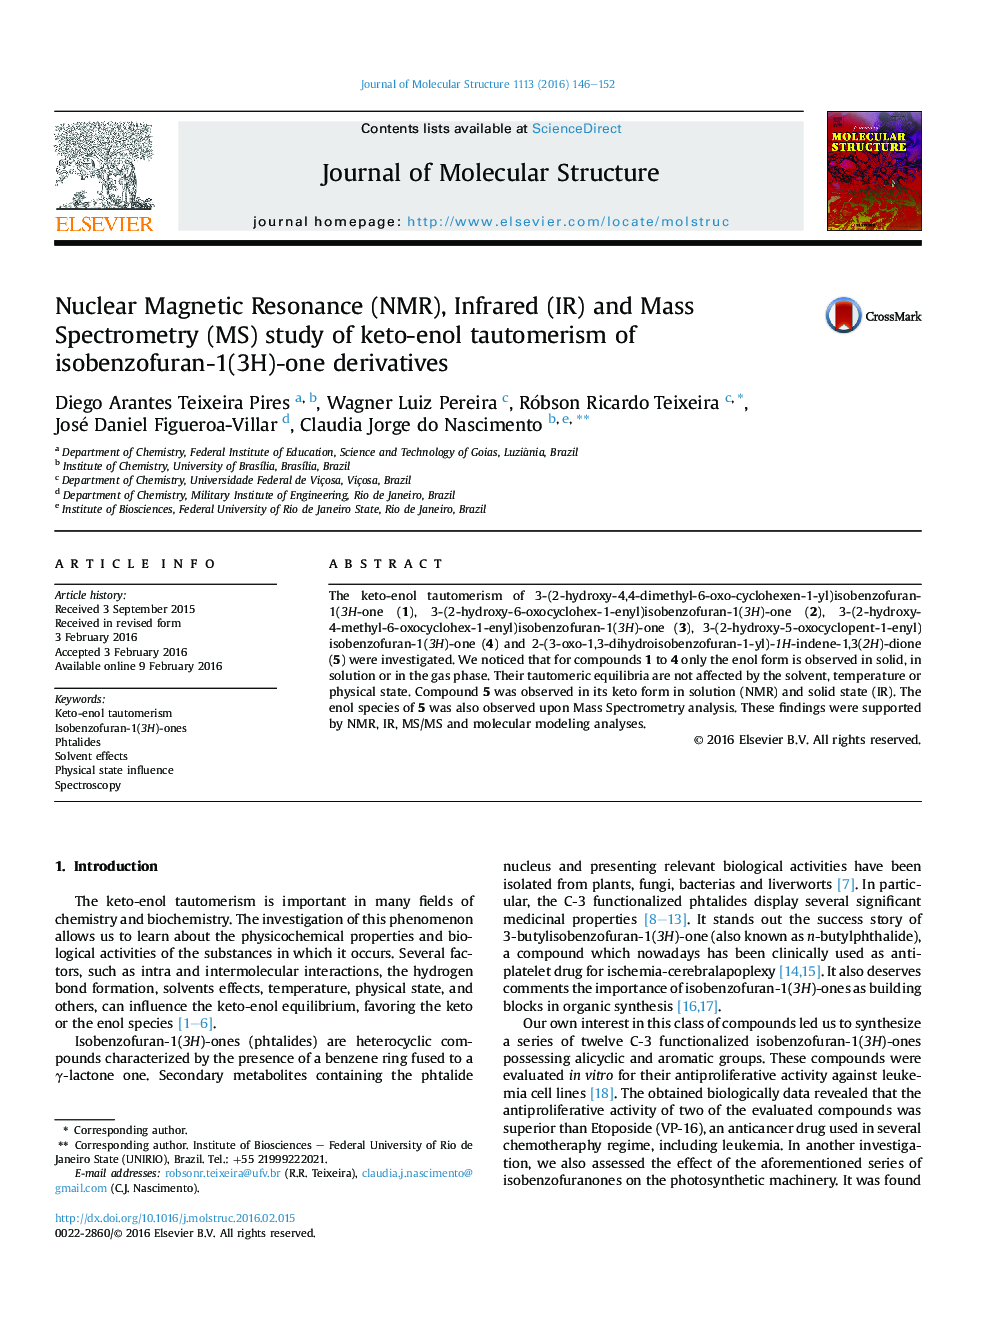 Nuclear Magnetic Resonance (NMR), Infrared (IR) and Mass Spectrometry (MS) study of keto-enol tautomerism of isobenzofuran-1(3H)-one derivatives